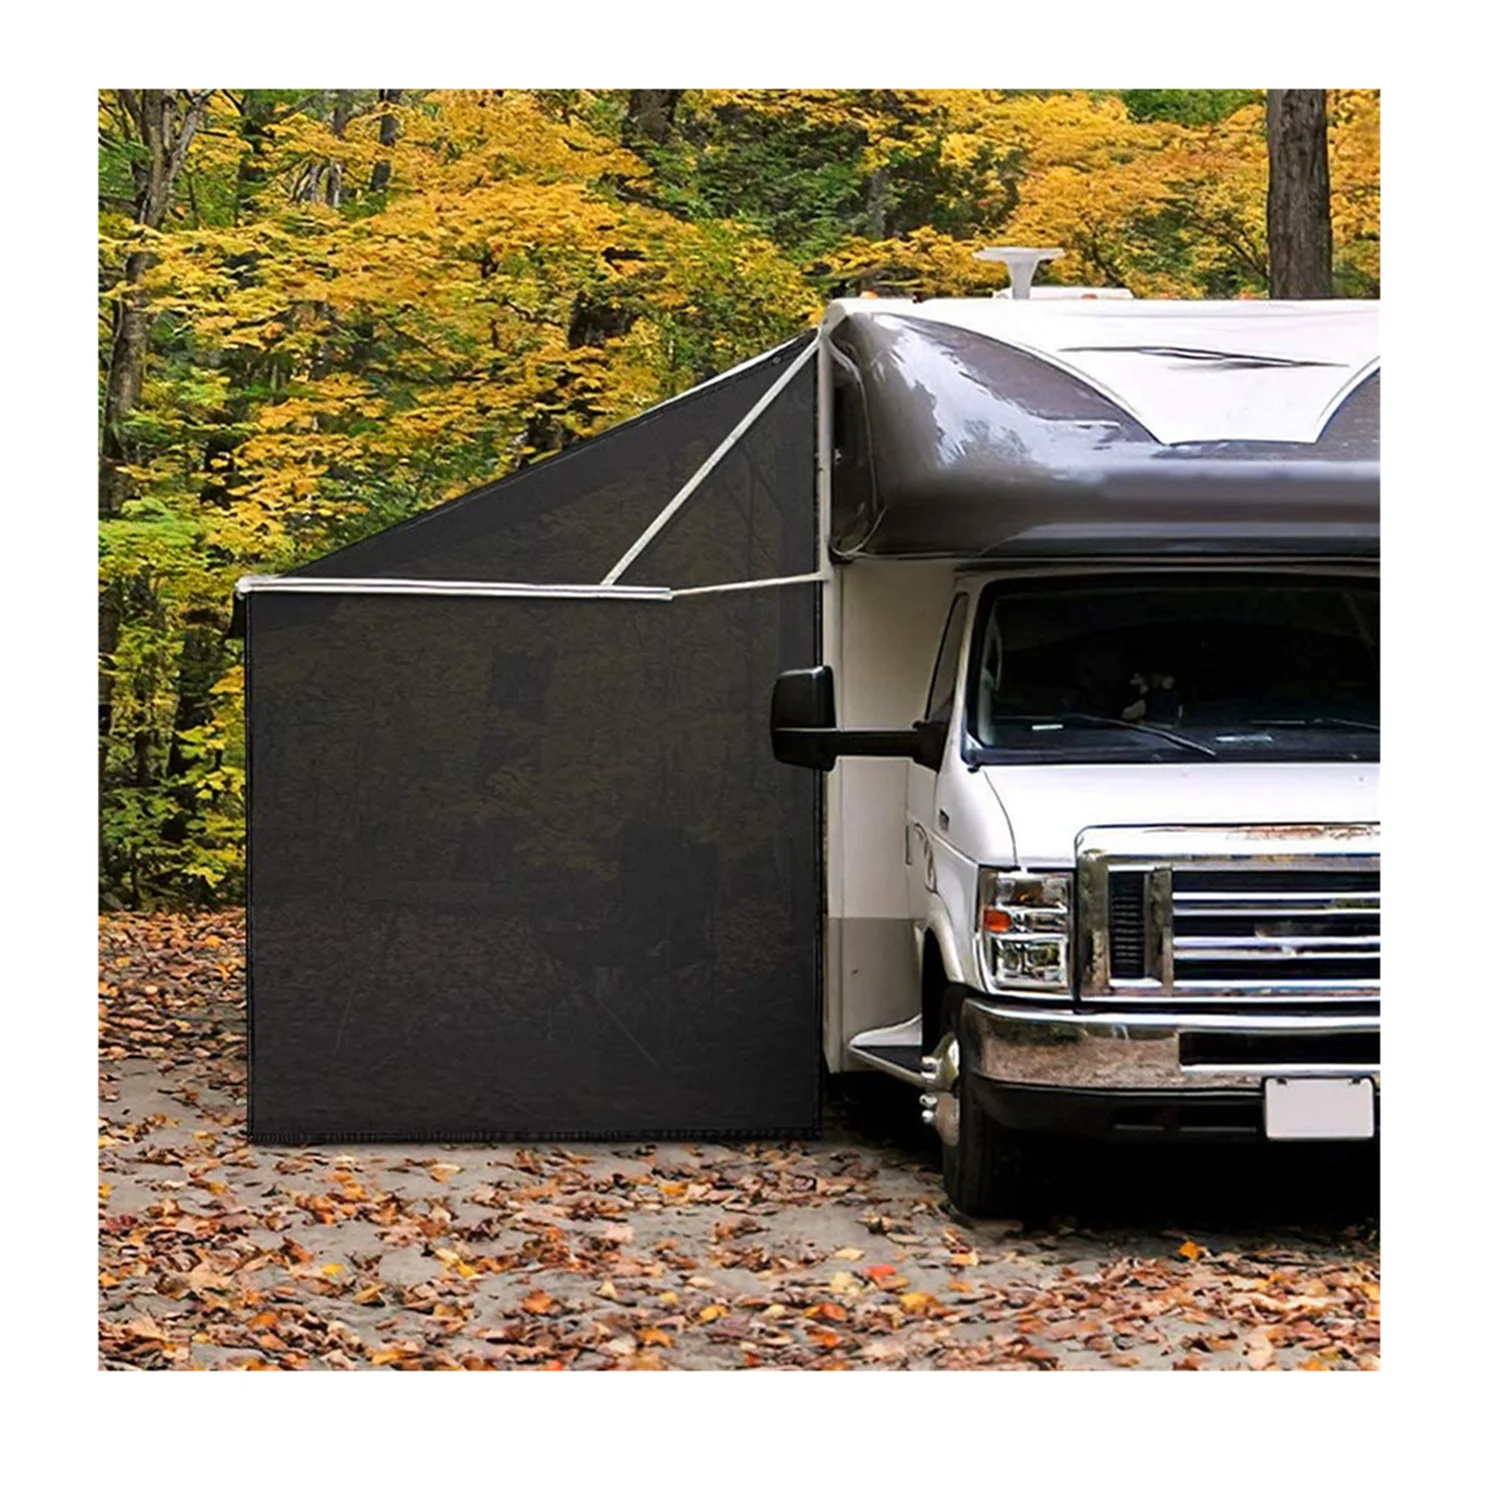 

Hot Sales 9'X7' Black Mesh Screen Side RV Awning Sun Shade for Camper Trailer